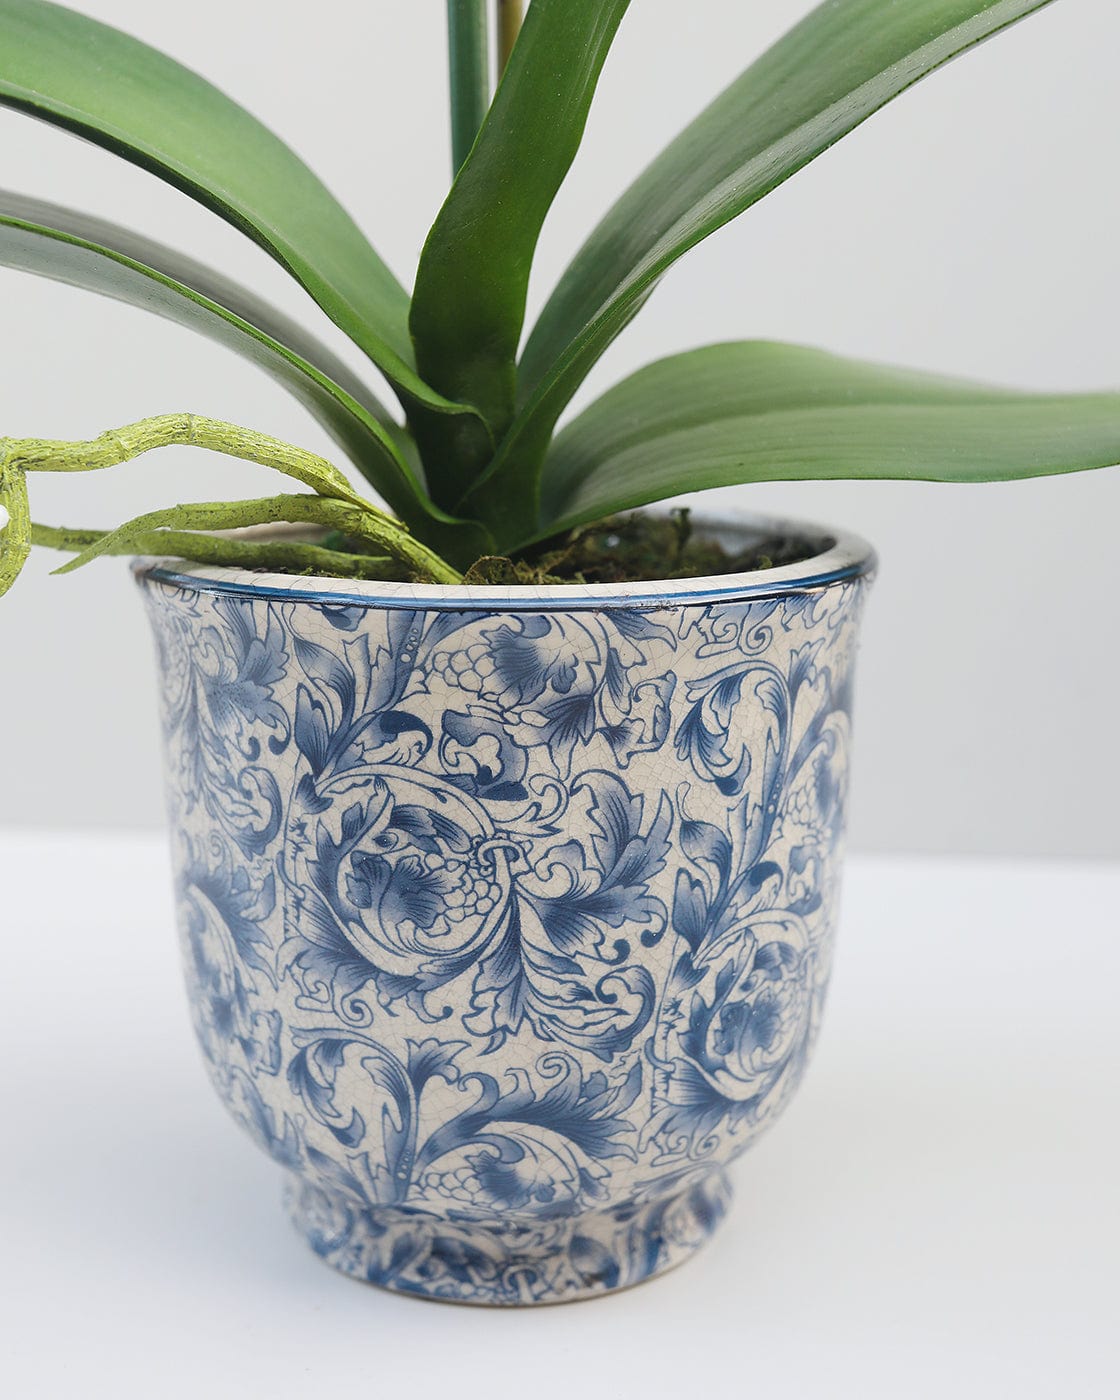 Details of Floral Print Blue and Cream Pot for Orchid Plant